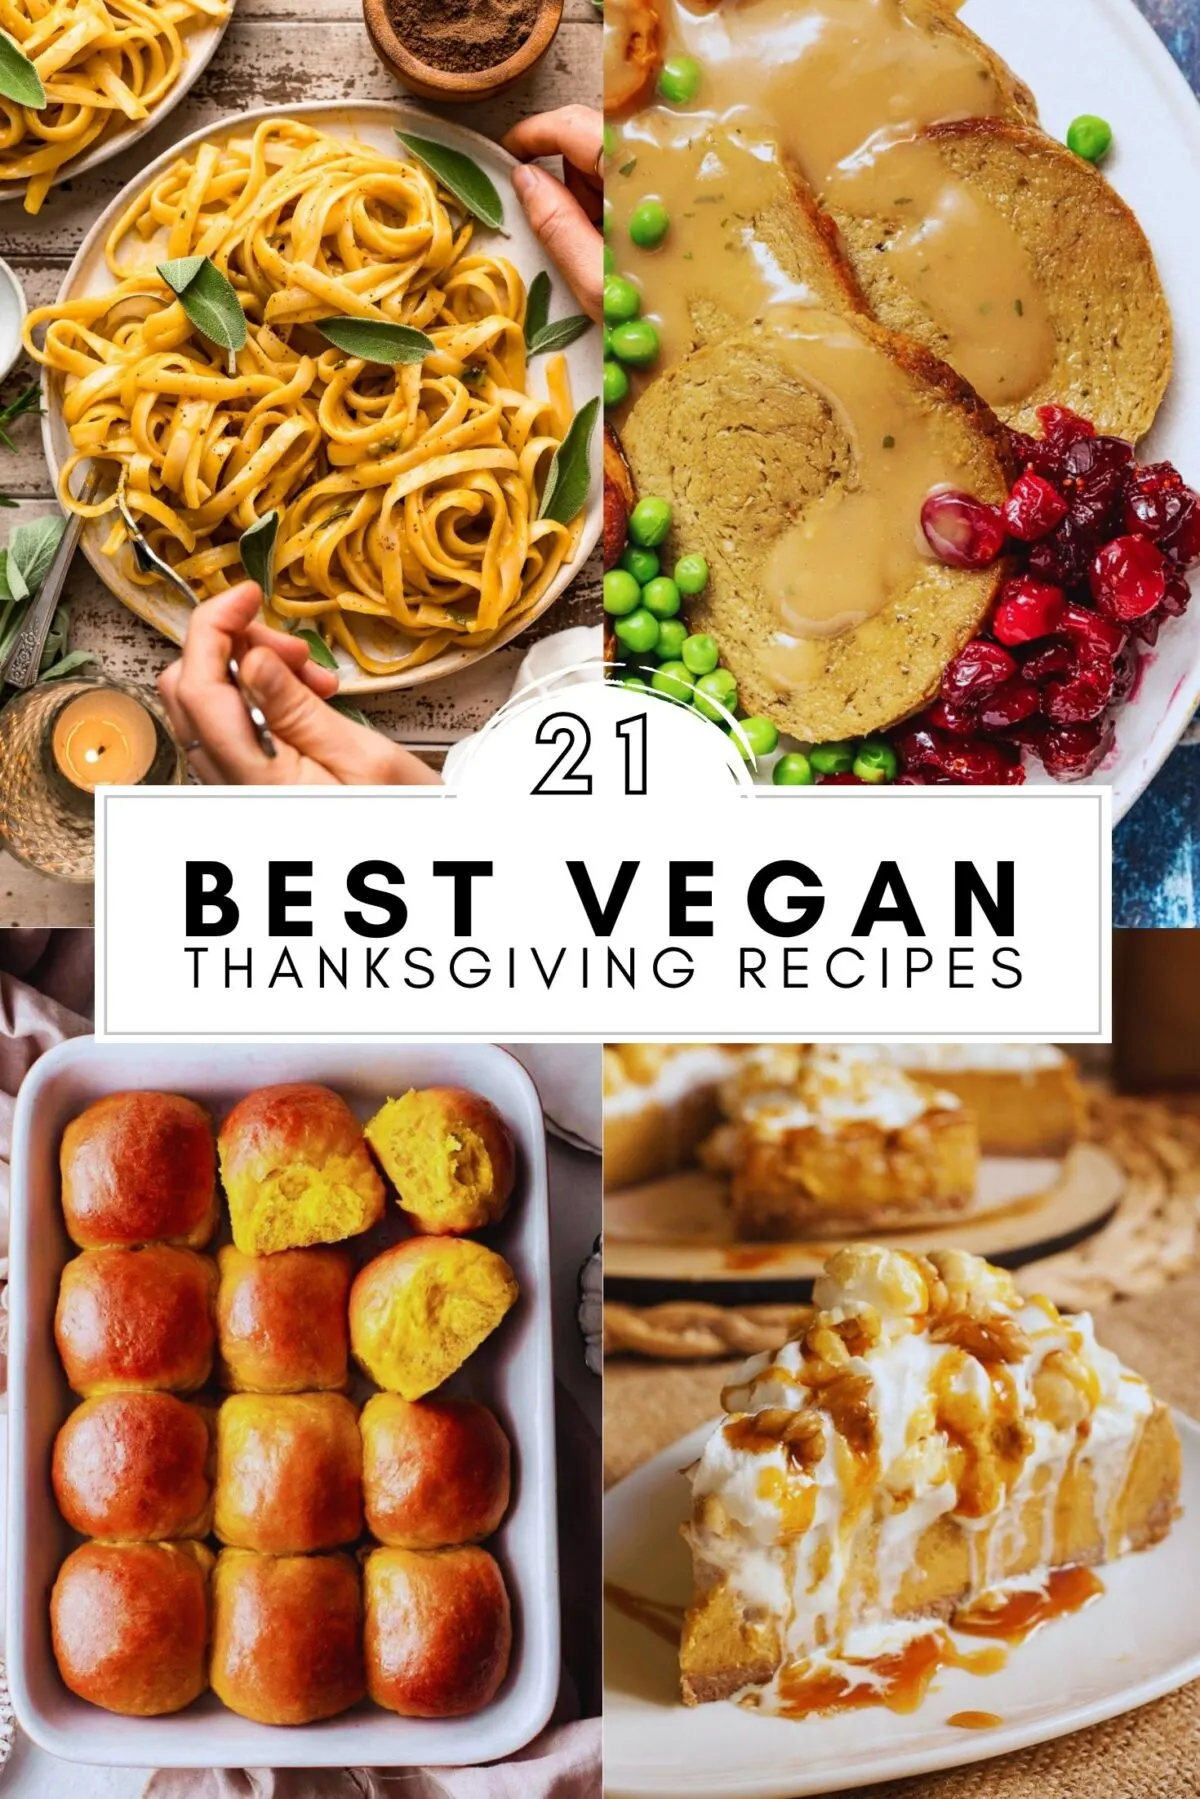 Looking for the best vegan thanksgiving recipes? These simple, healthy and delicious recipes will help you to plan a memorable holiday.